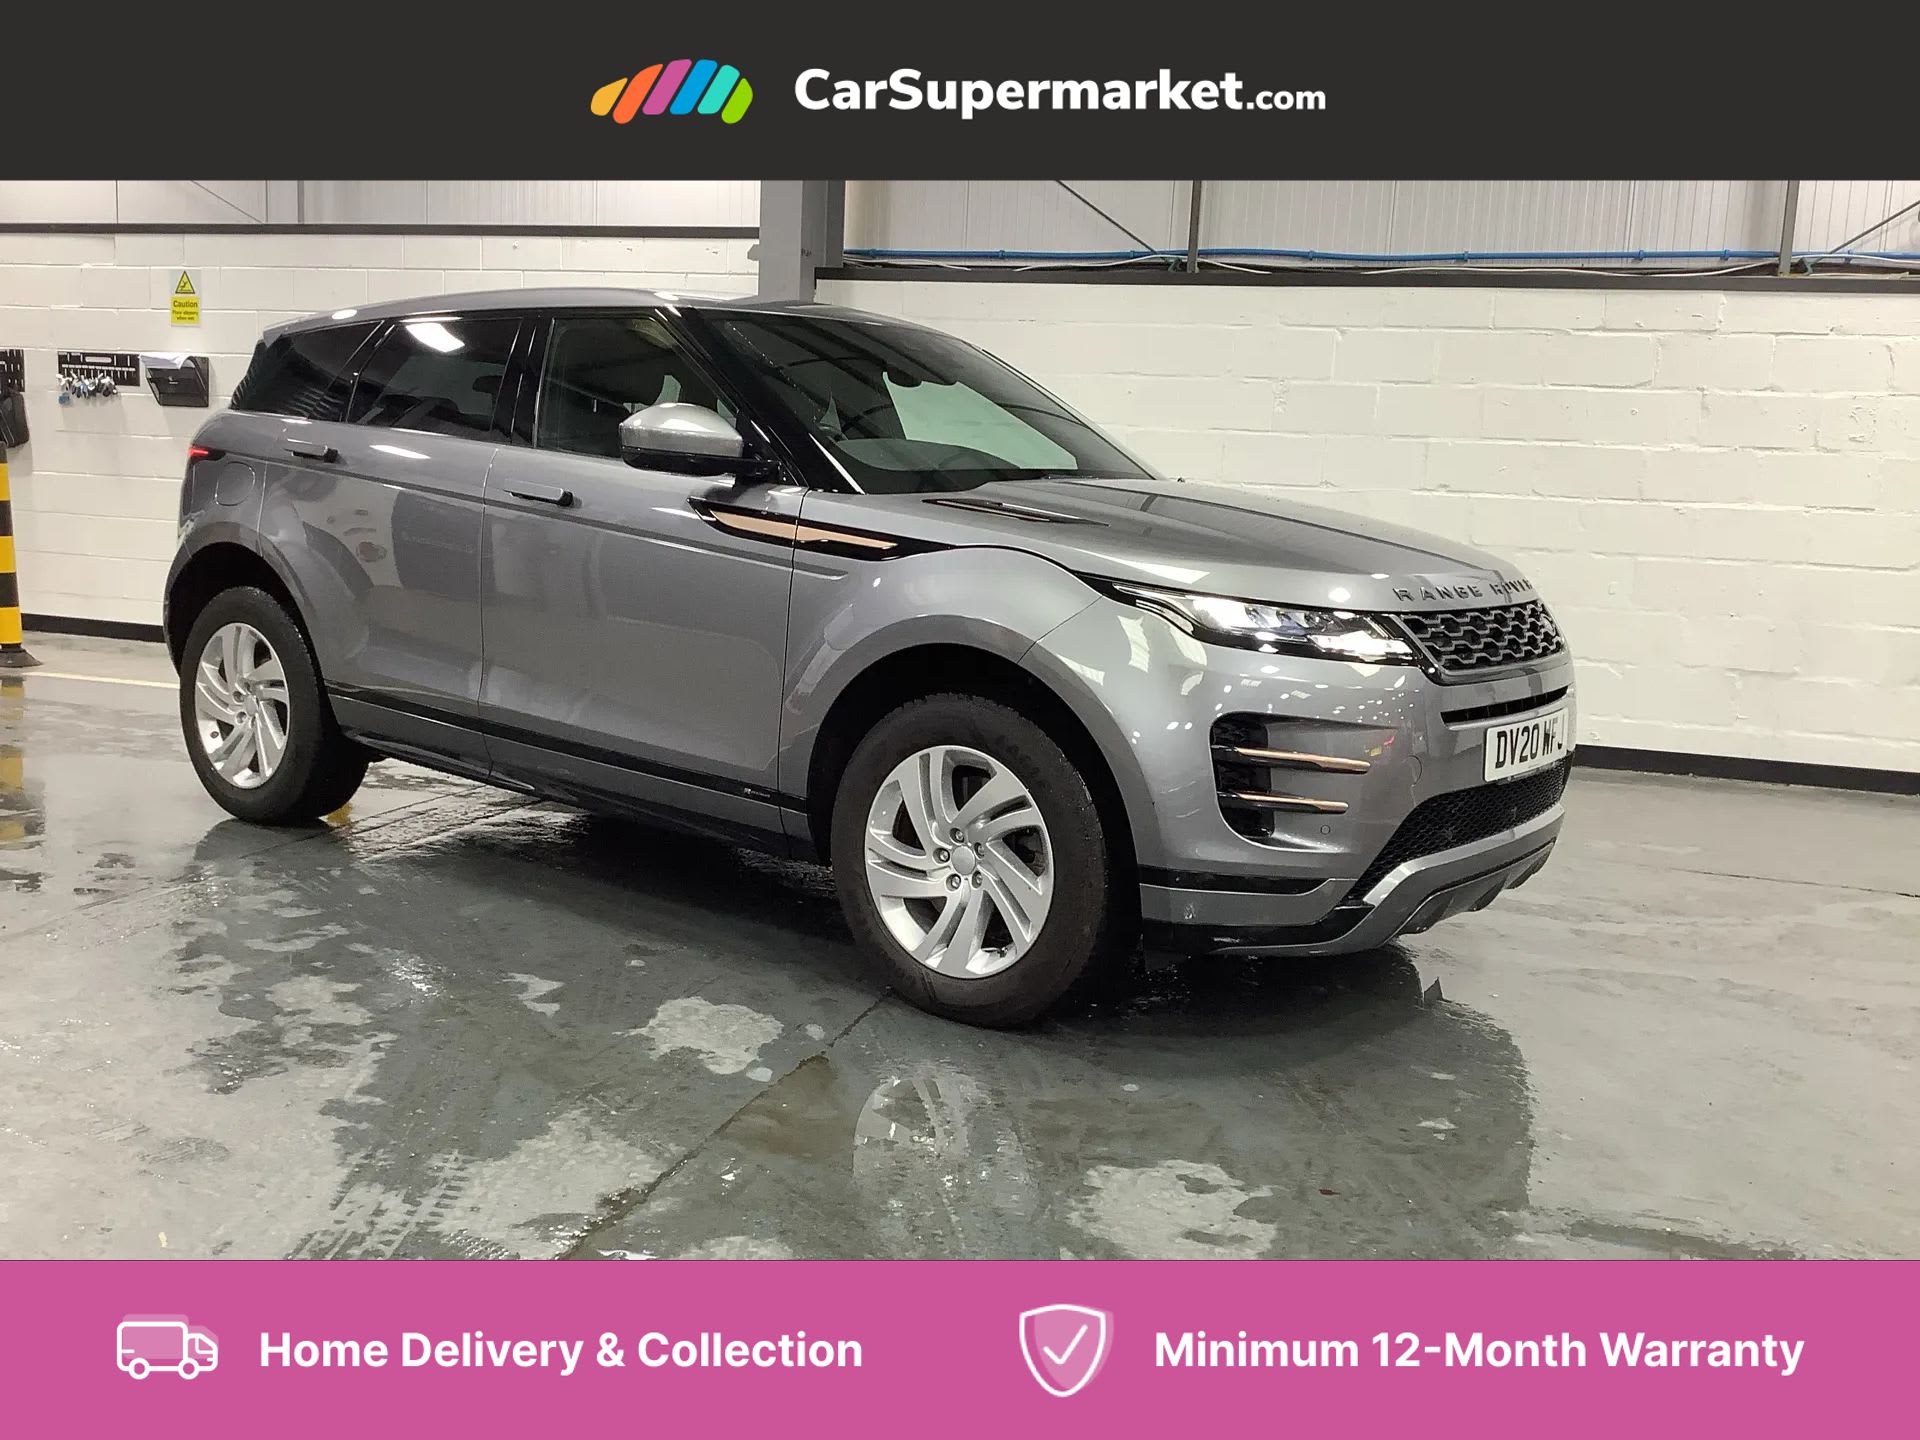 2020 used Land Rover Range Rover Evoque 2.0 D150 R-Dynamic S Auto